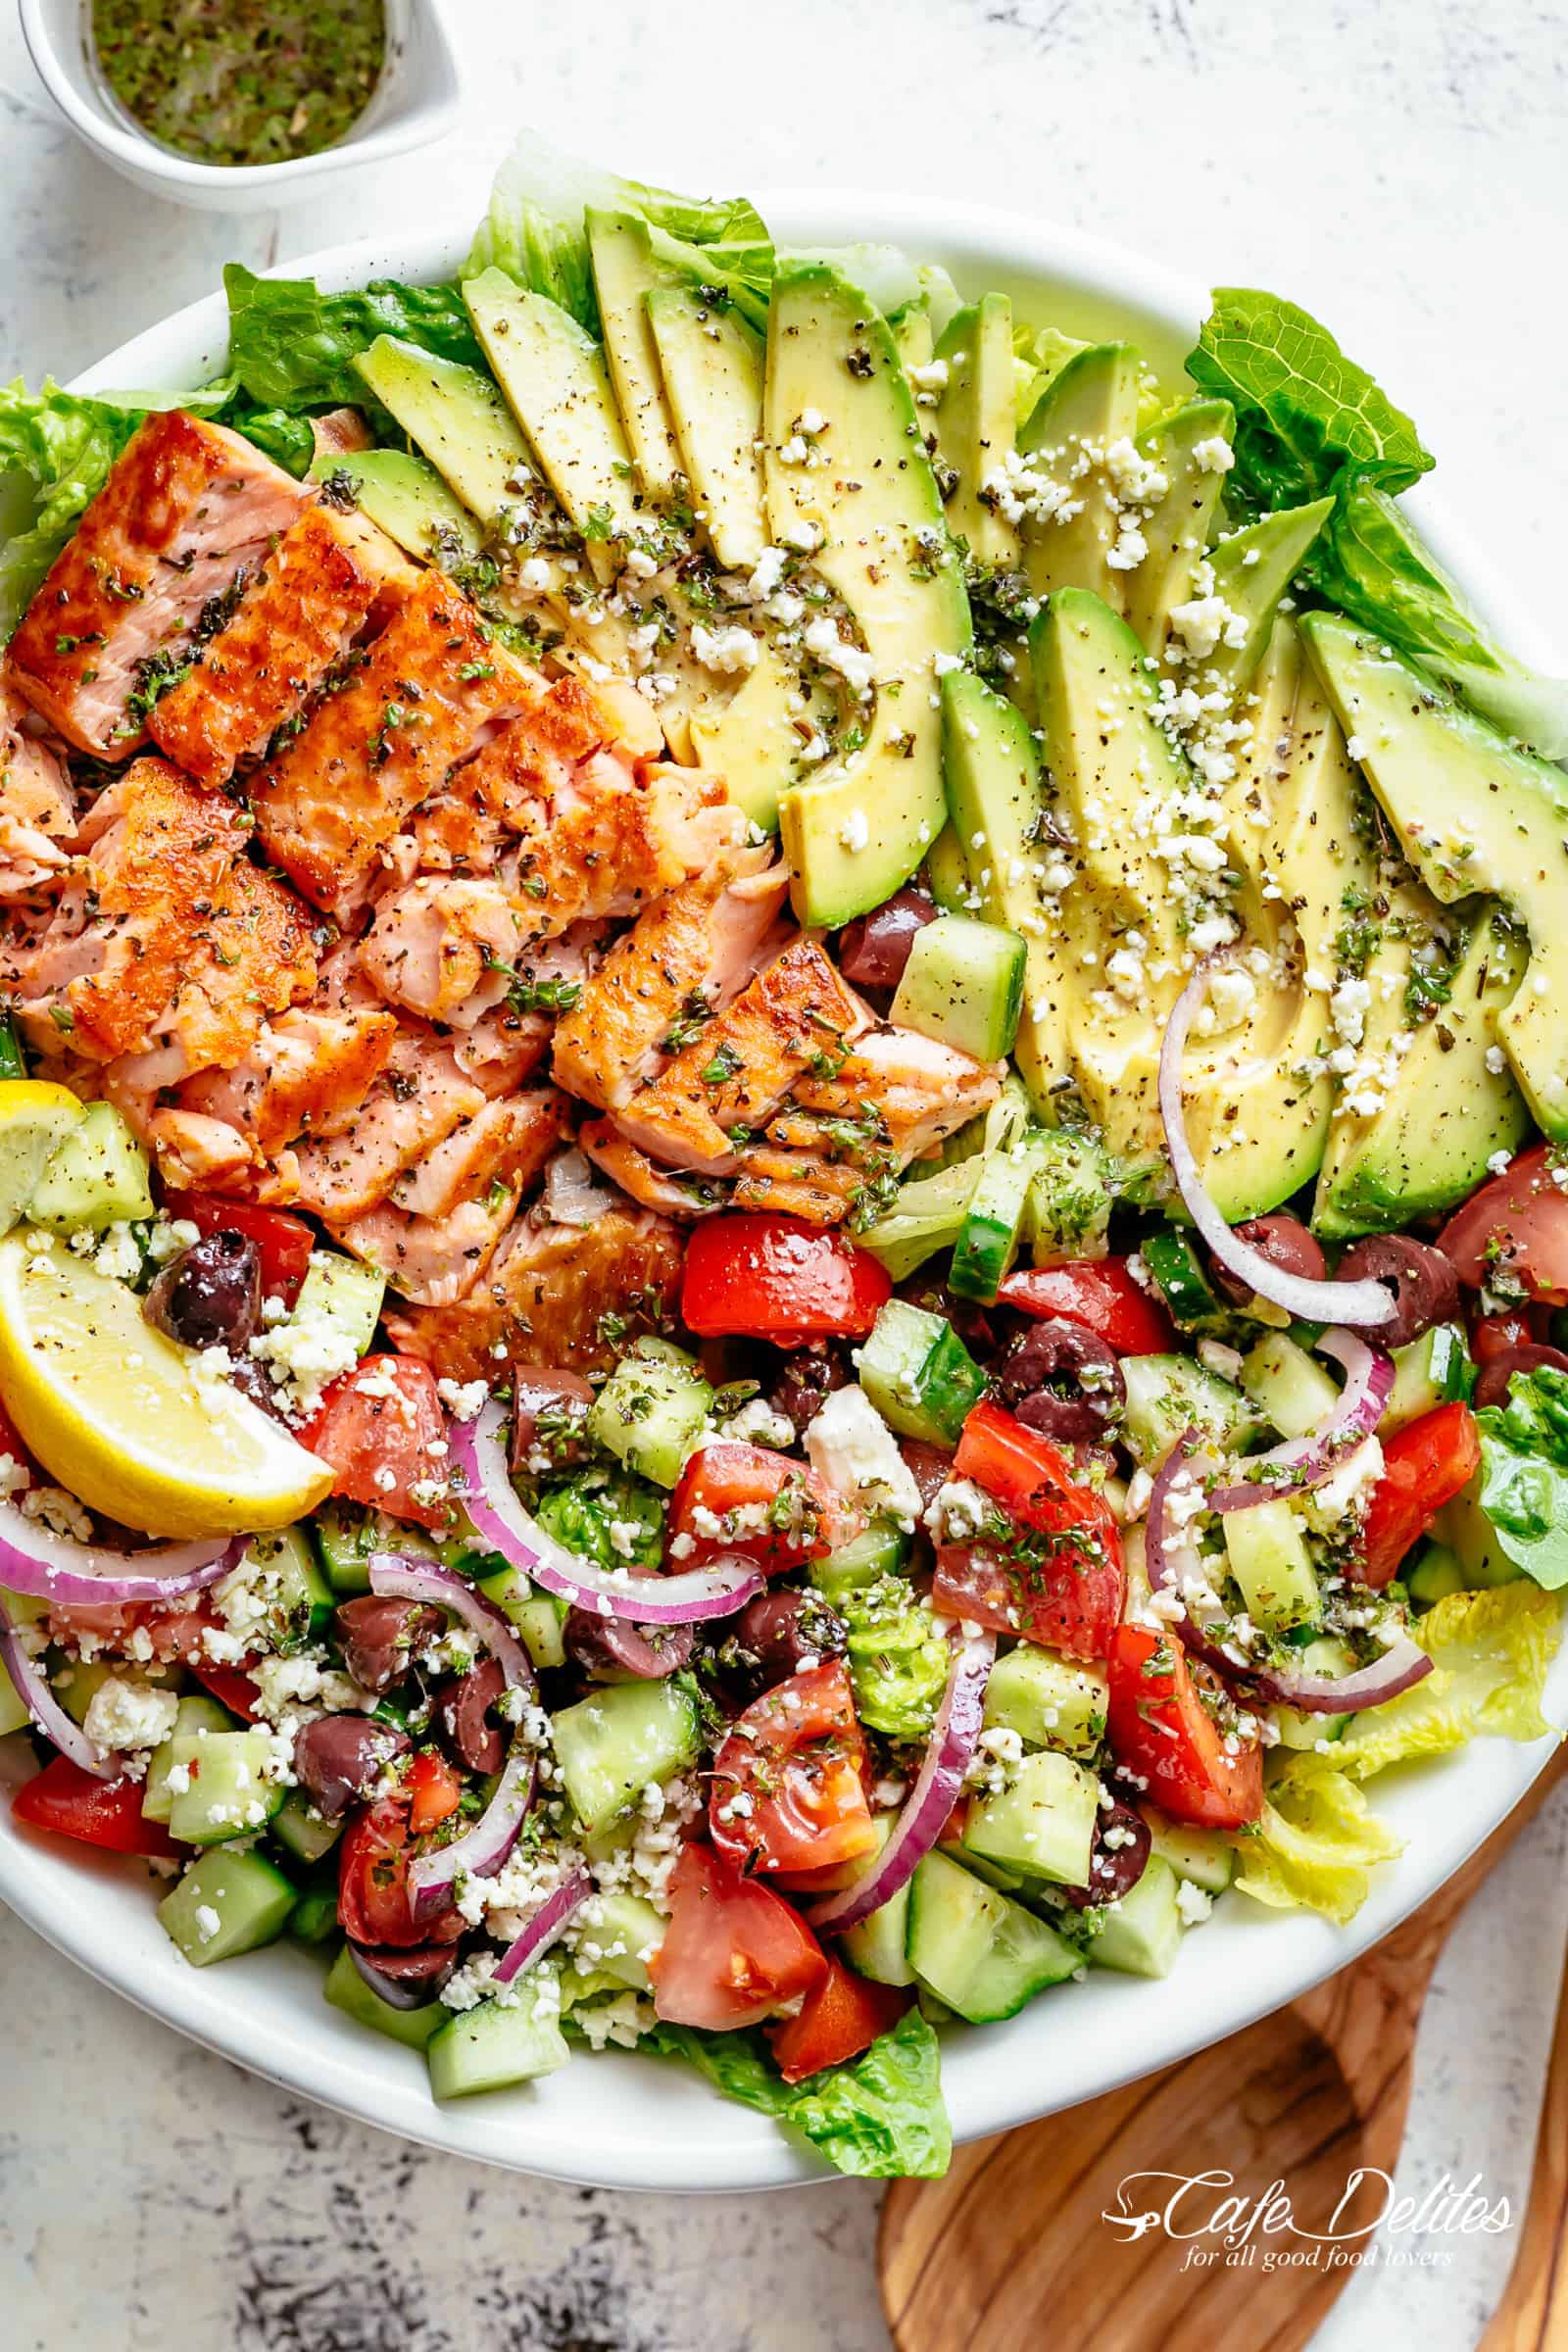 Avocado Salmon Salad with an incredible lemon herb Mediterranean dressing! Loaded with cucumber, olives, tomatoes and feta cheese! | cafedelites.com